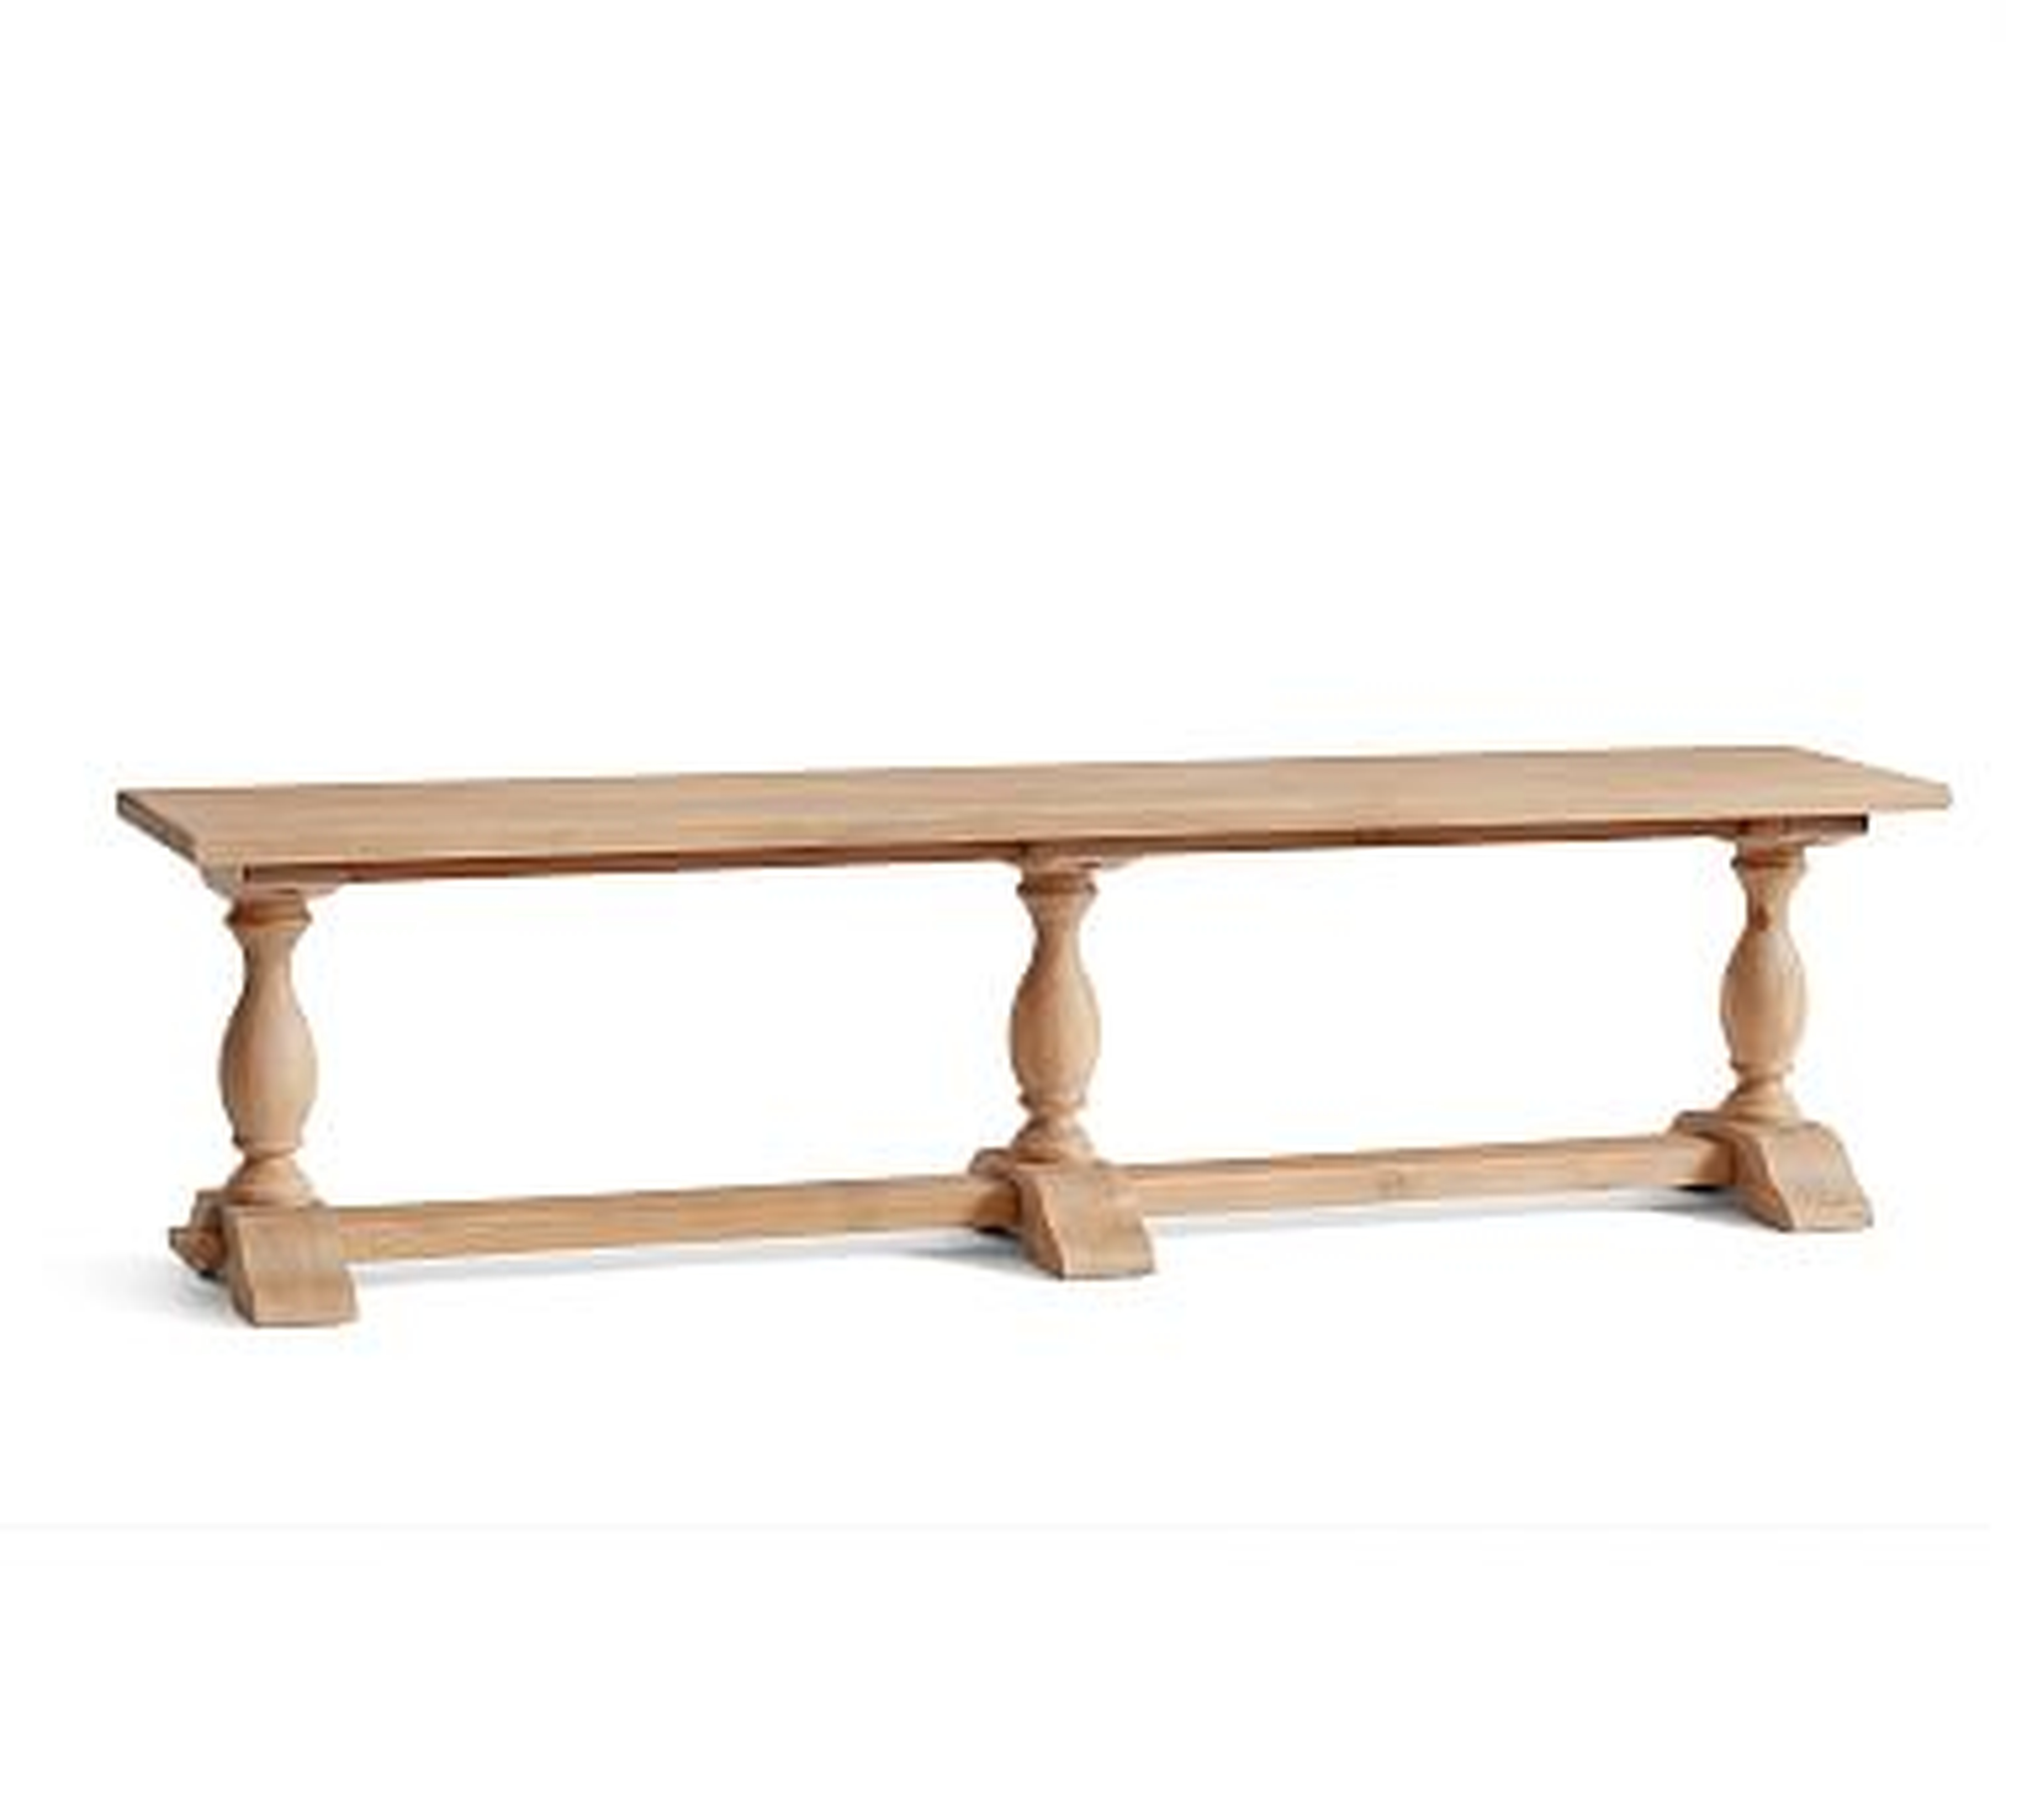 Parkmore Reclaimed Wood Dining Bench, Lancaster Pine - Pottery Barn